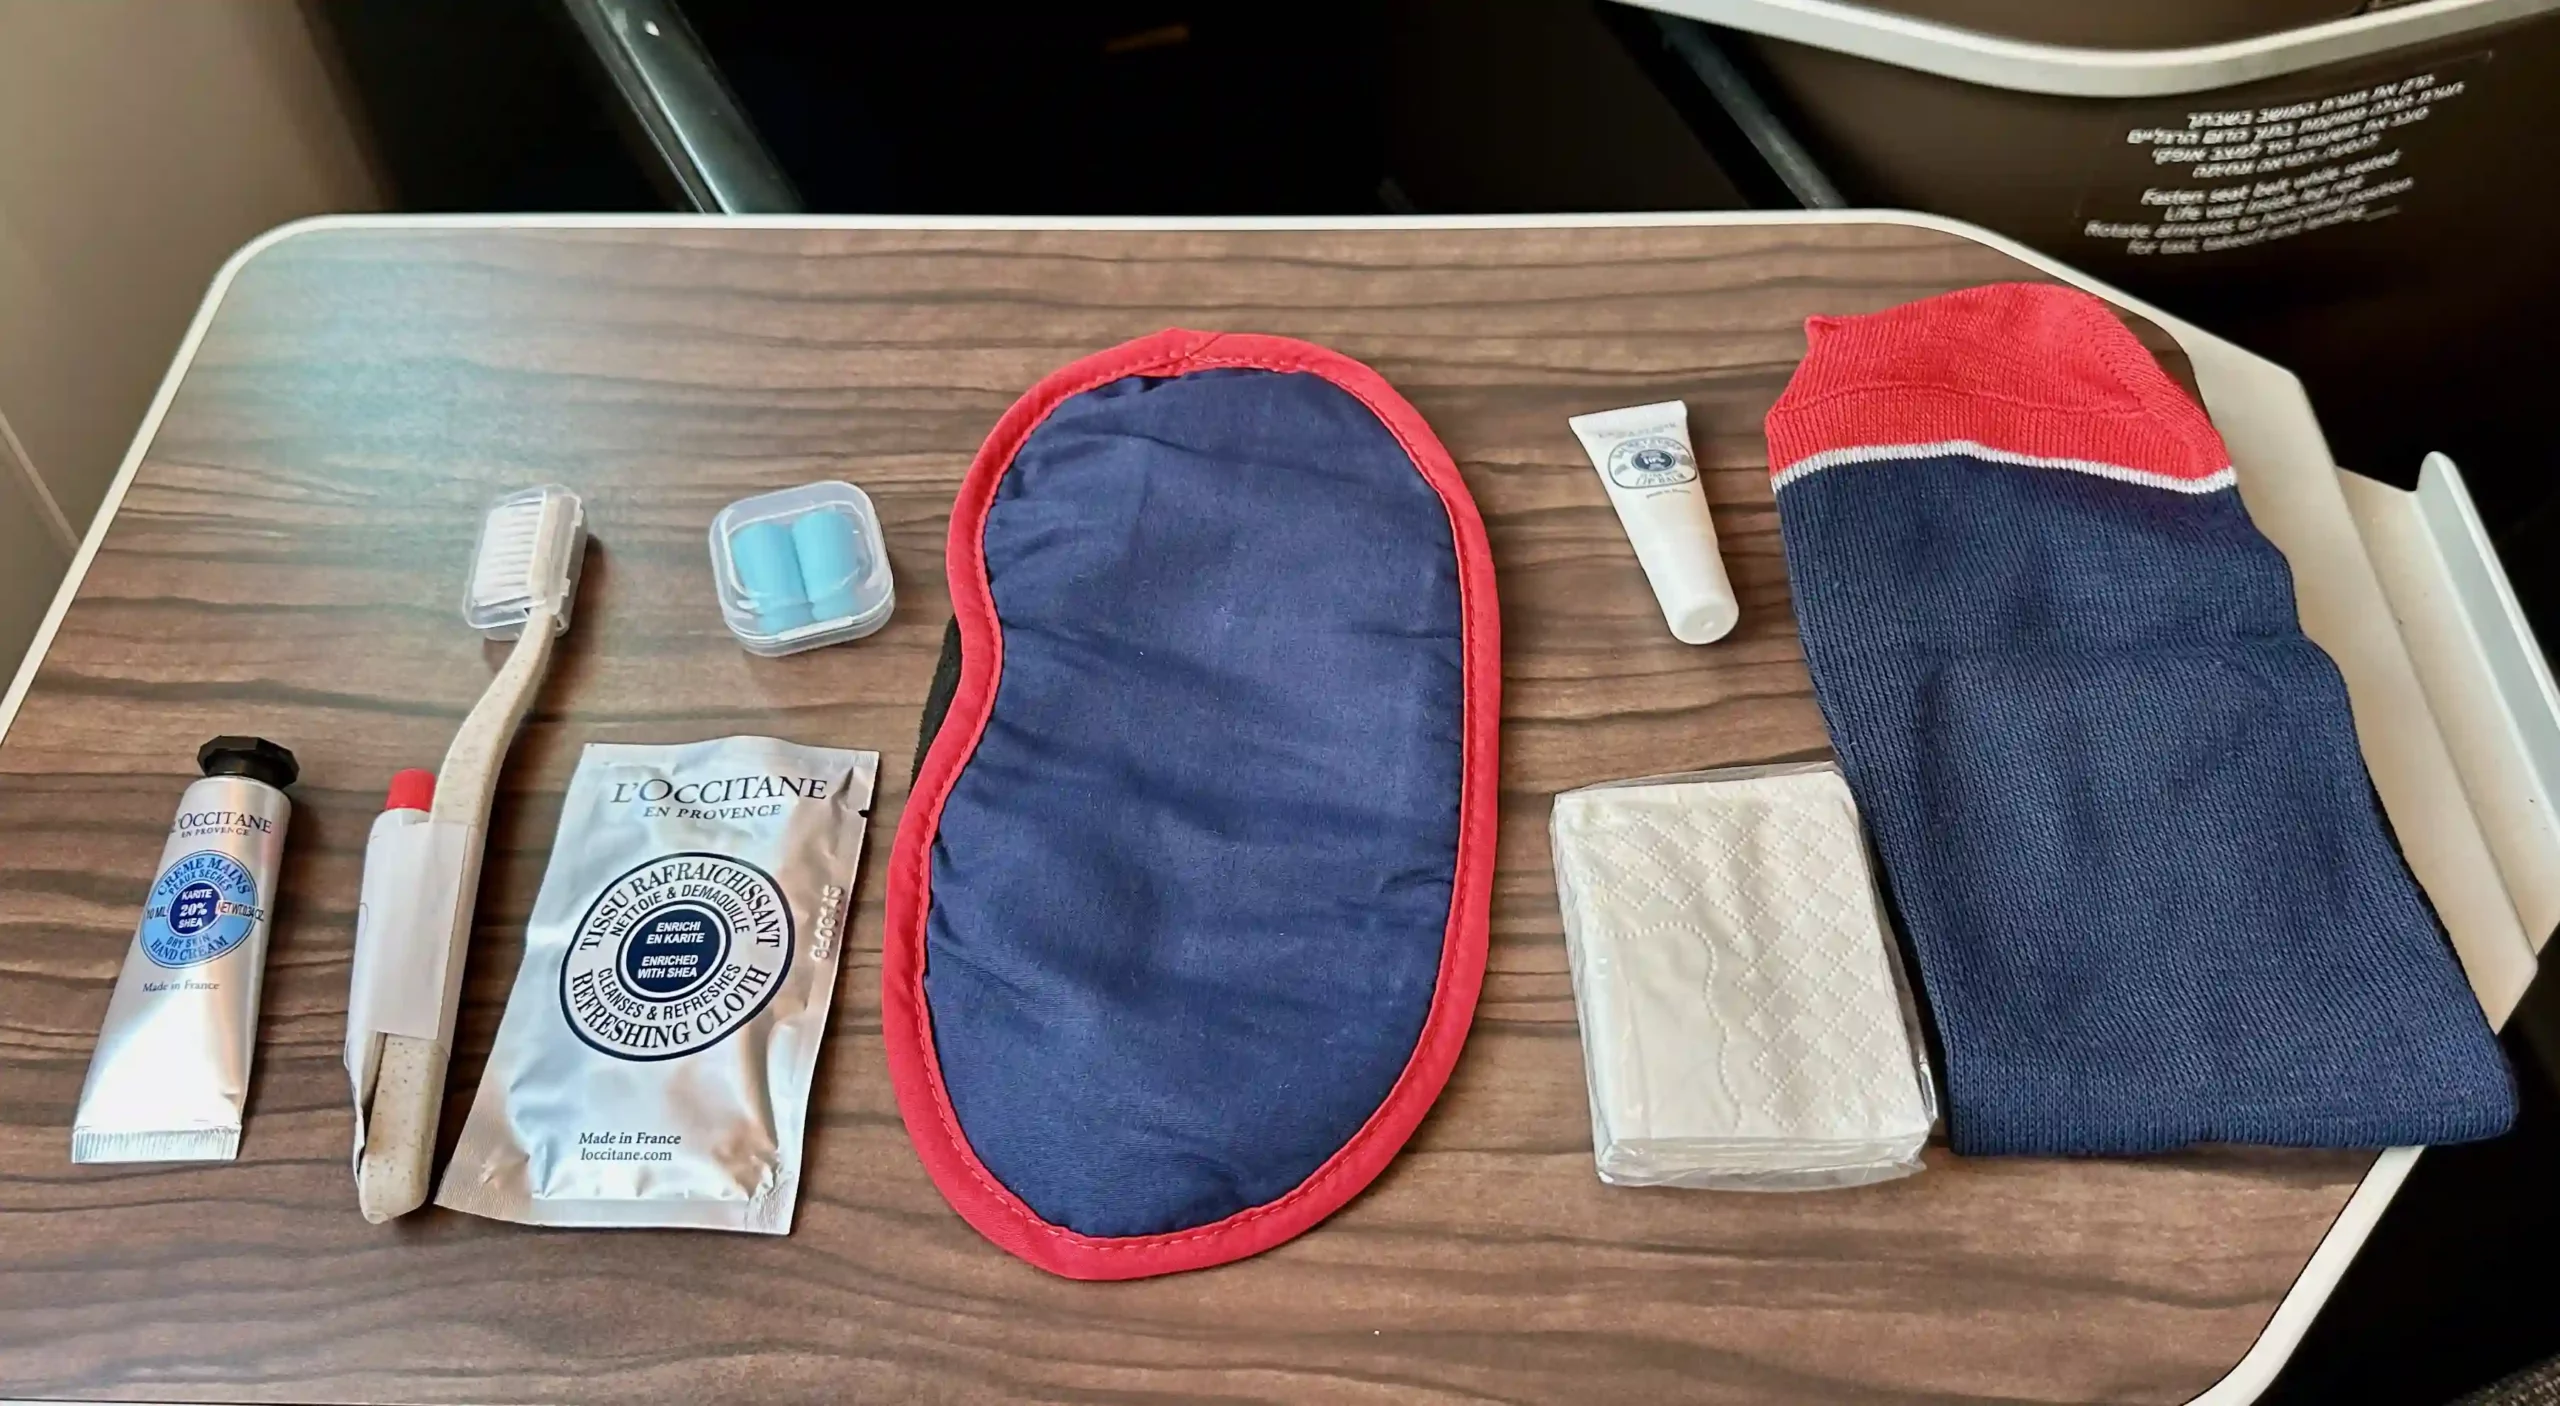 a sleeping bag and other items on a table